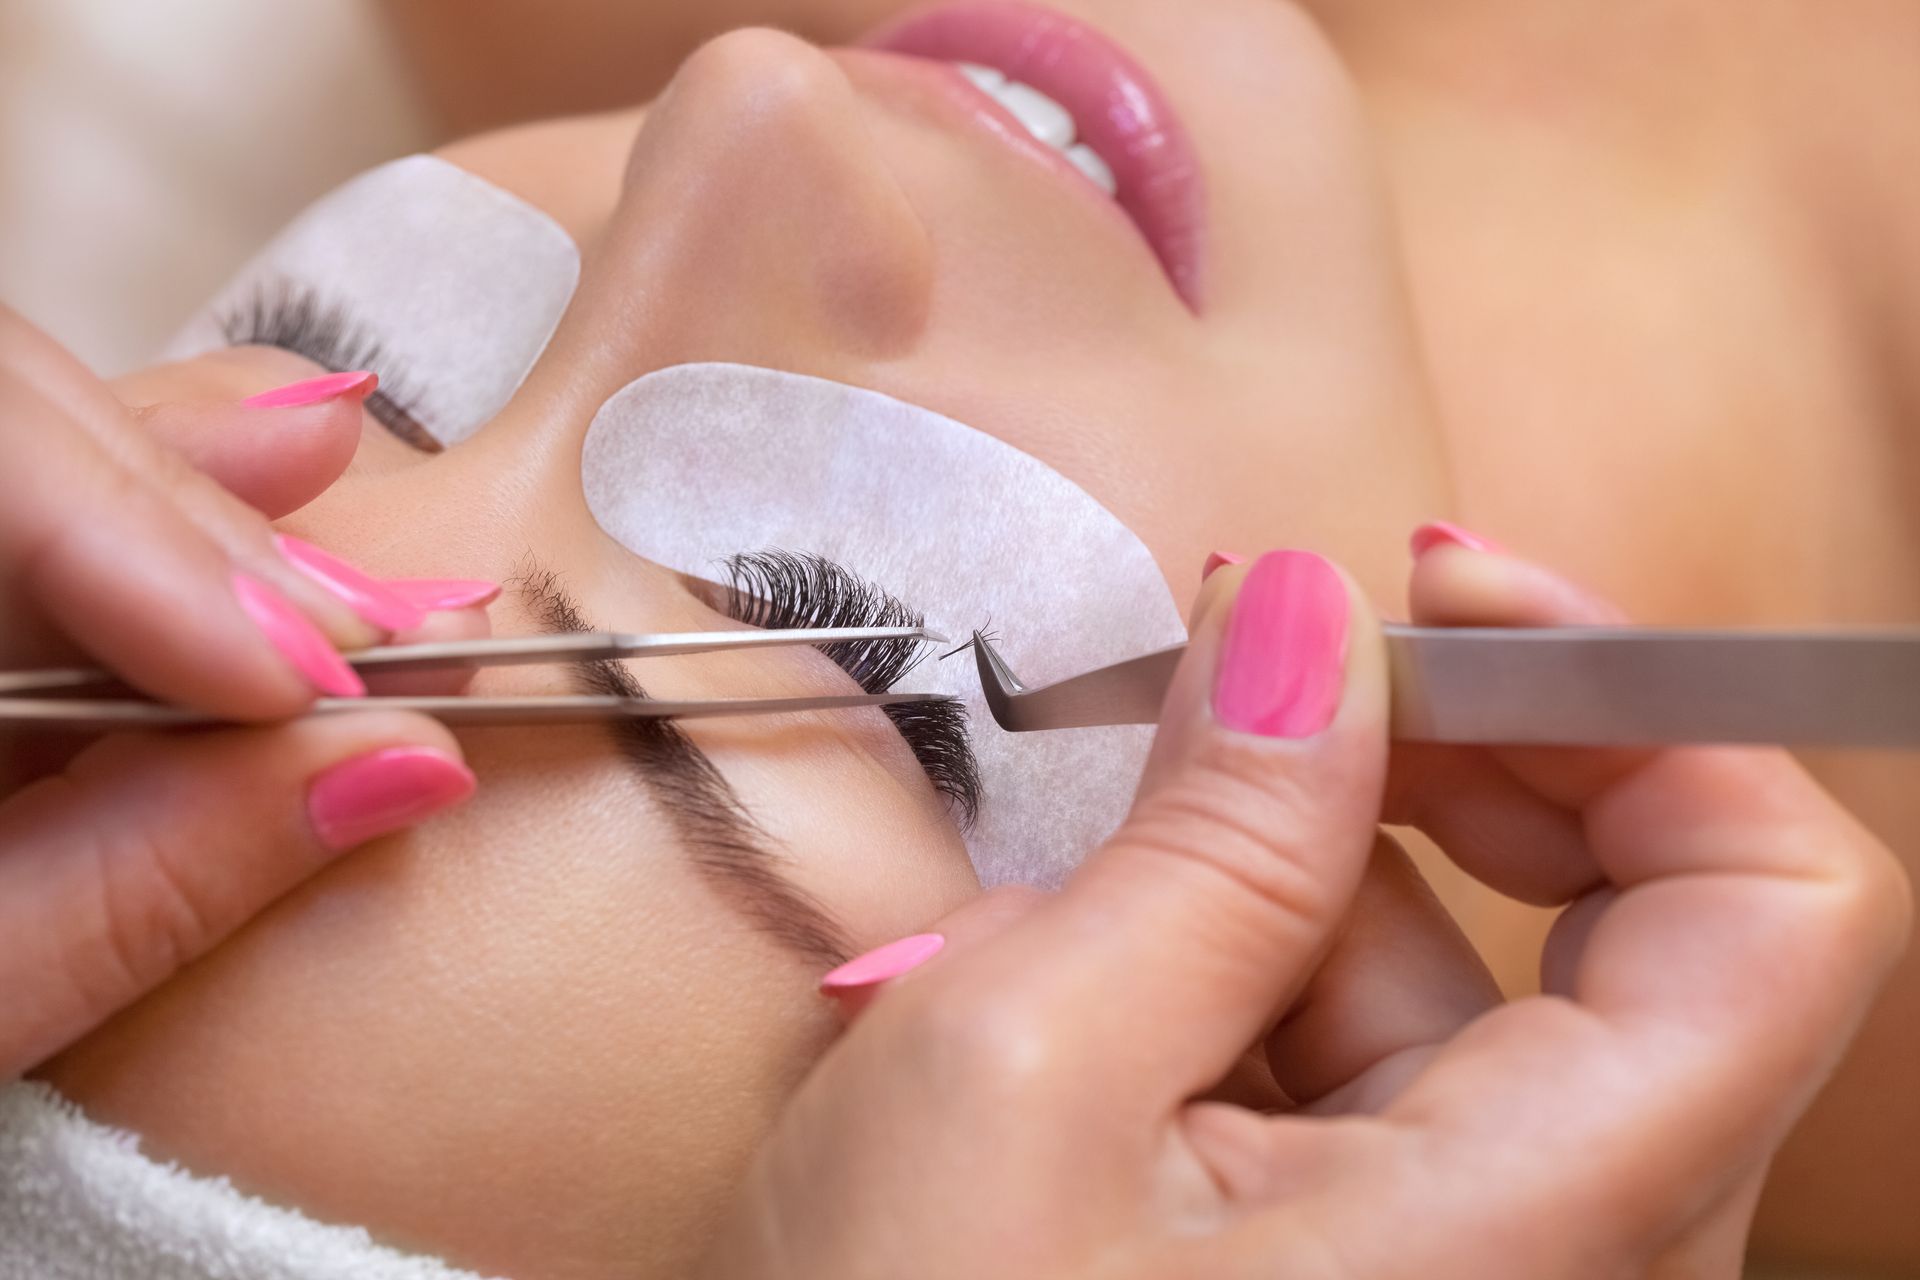 A woman with pink nails is getting eyelash extensions.